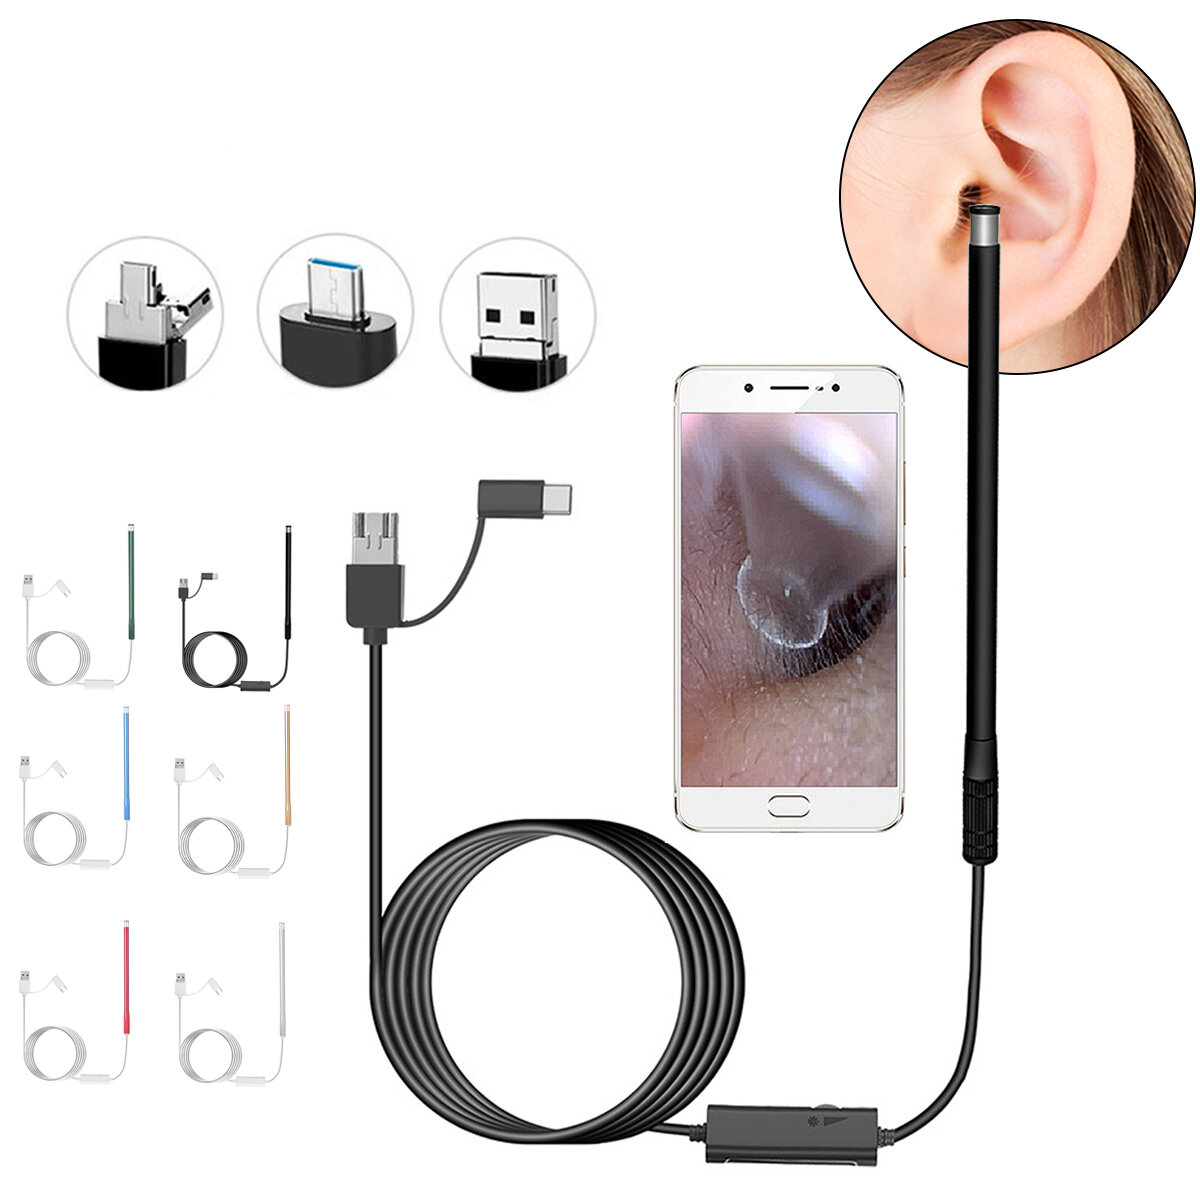 3-in-1 HD Medical Ear Cleaning Endoscope Spoon IP67 Waterproof Visual Mouth Nose Otoscope Tool Ear Picker Ear Wax Remove